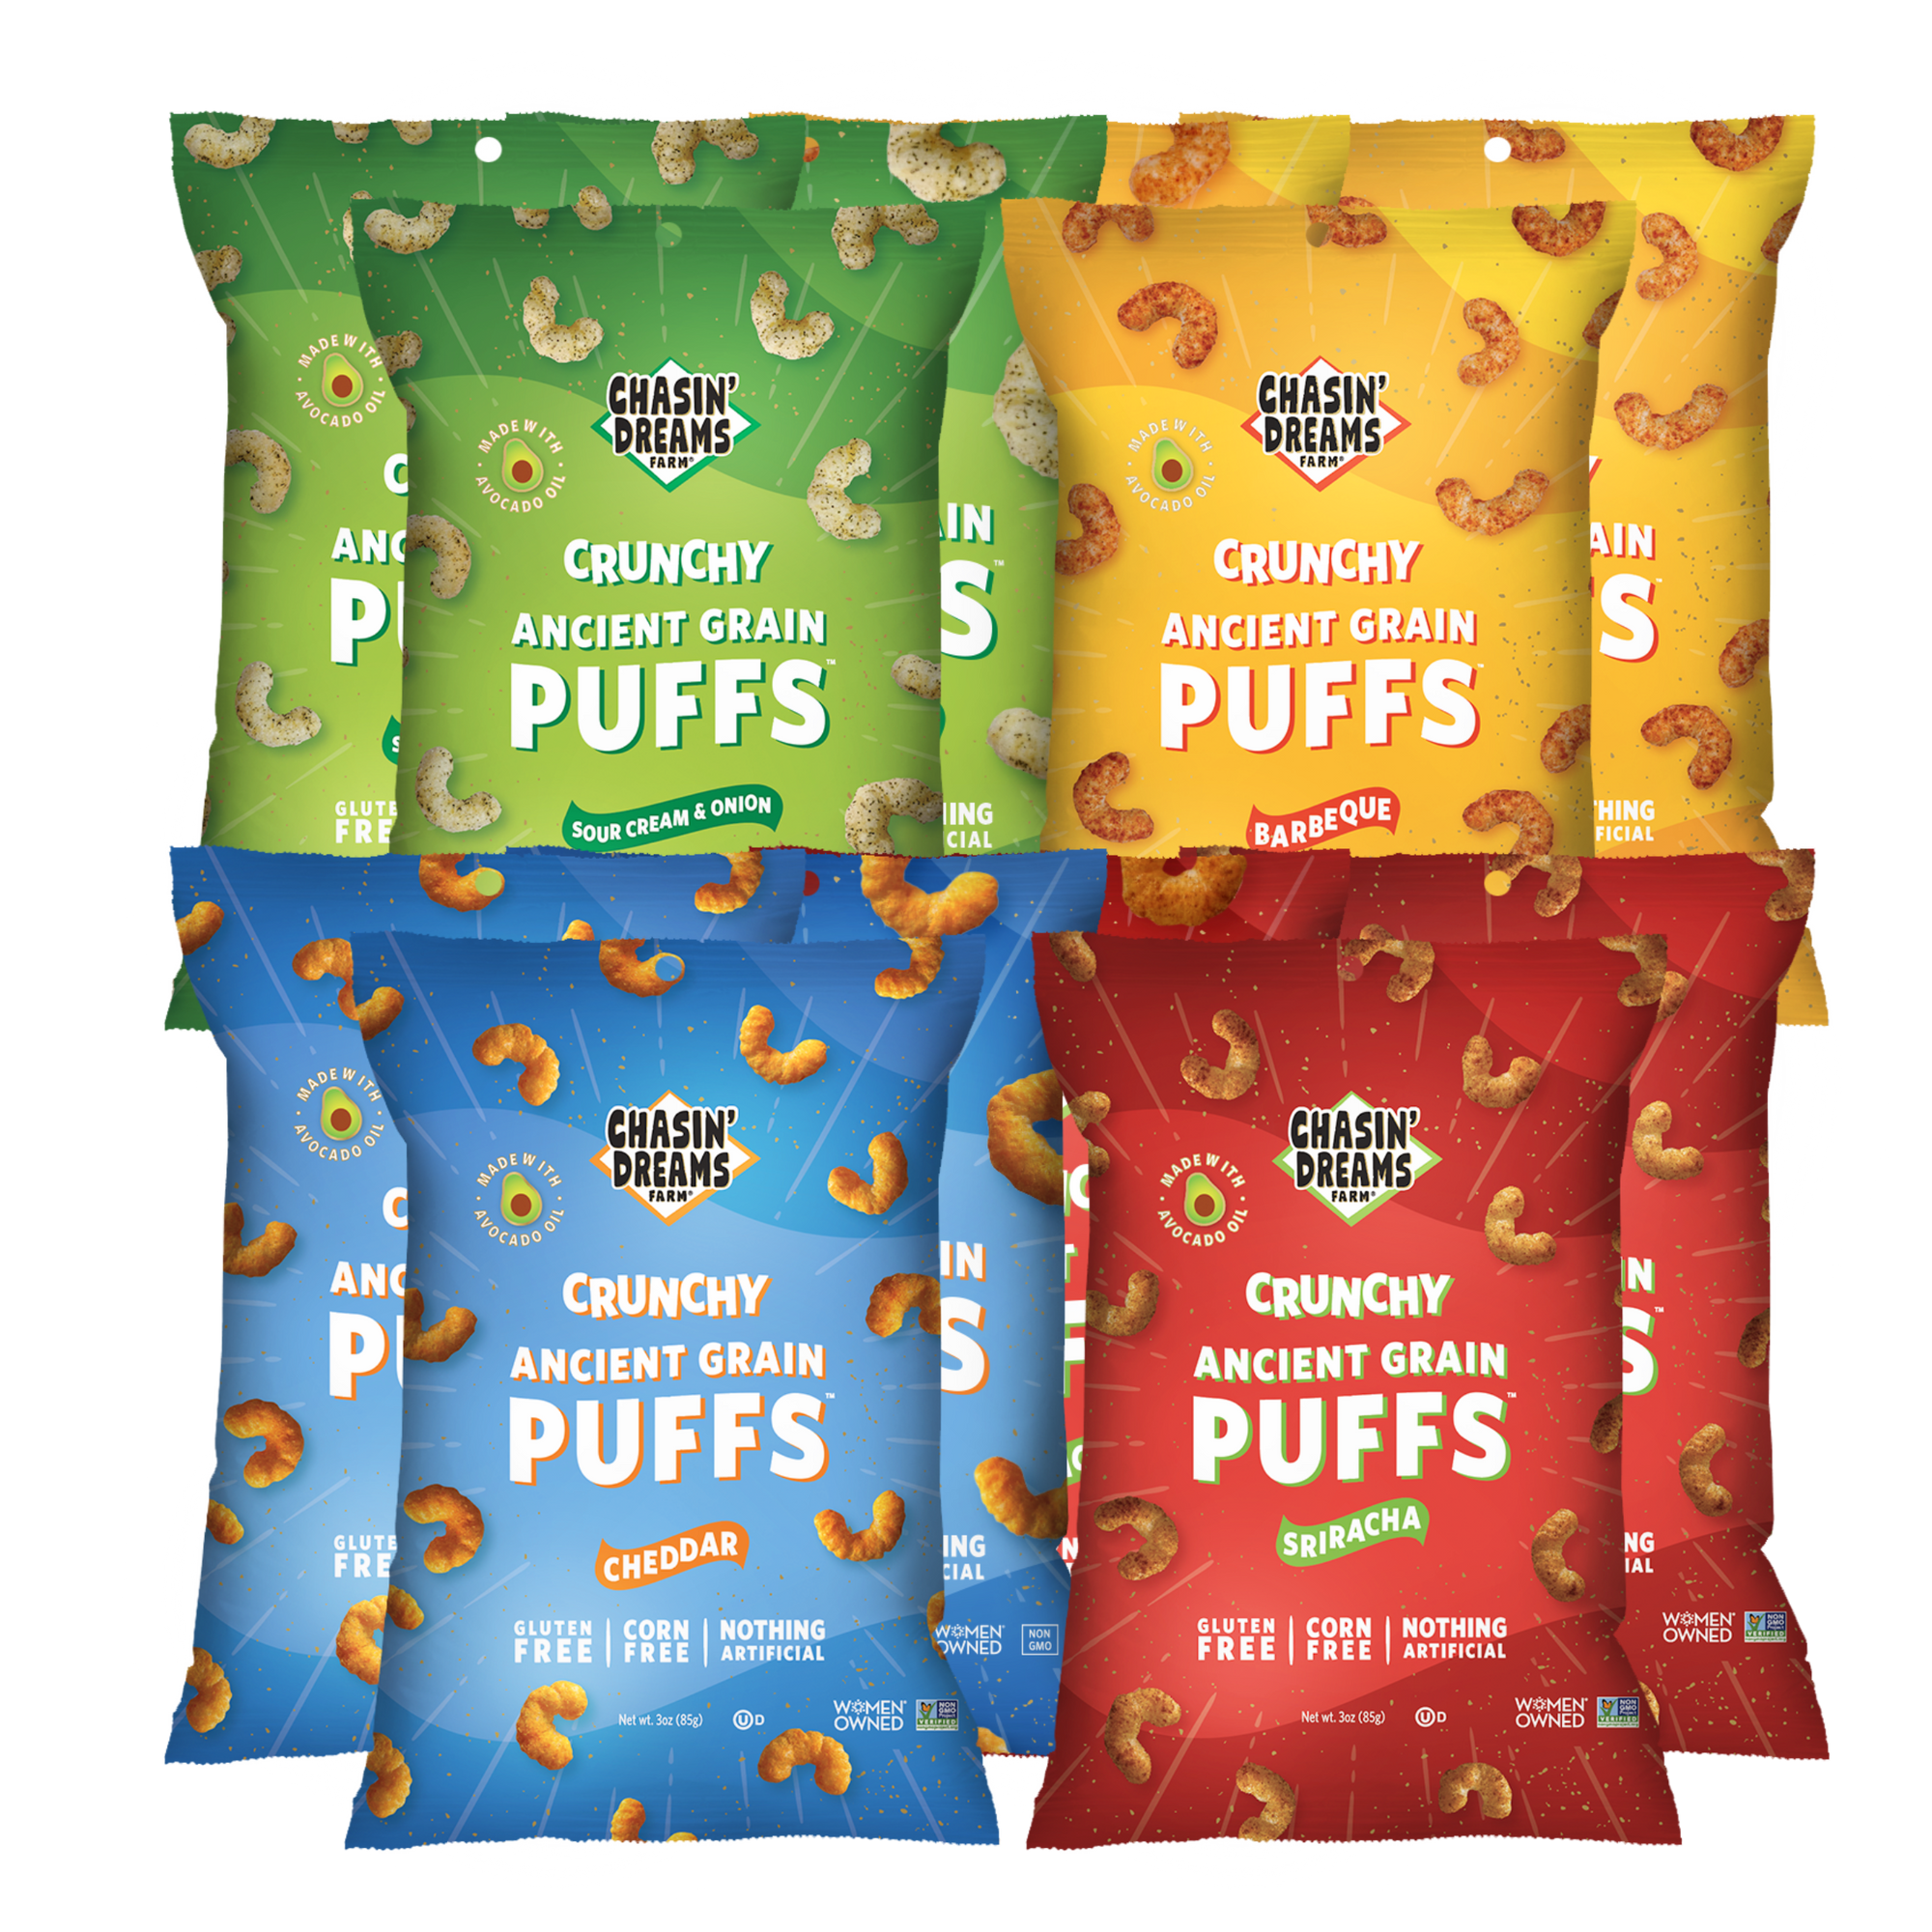 Three yellow bags of Barbeque Puffs 3oz, three red bags of Sriracha Puffs 3oz, three blue bags of Cheddar Puffs 3oz and three green bags of Sour Cream & Onion 3oz puffs.